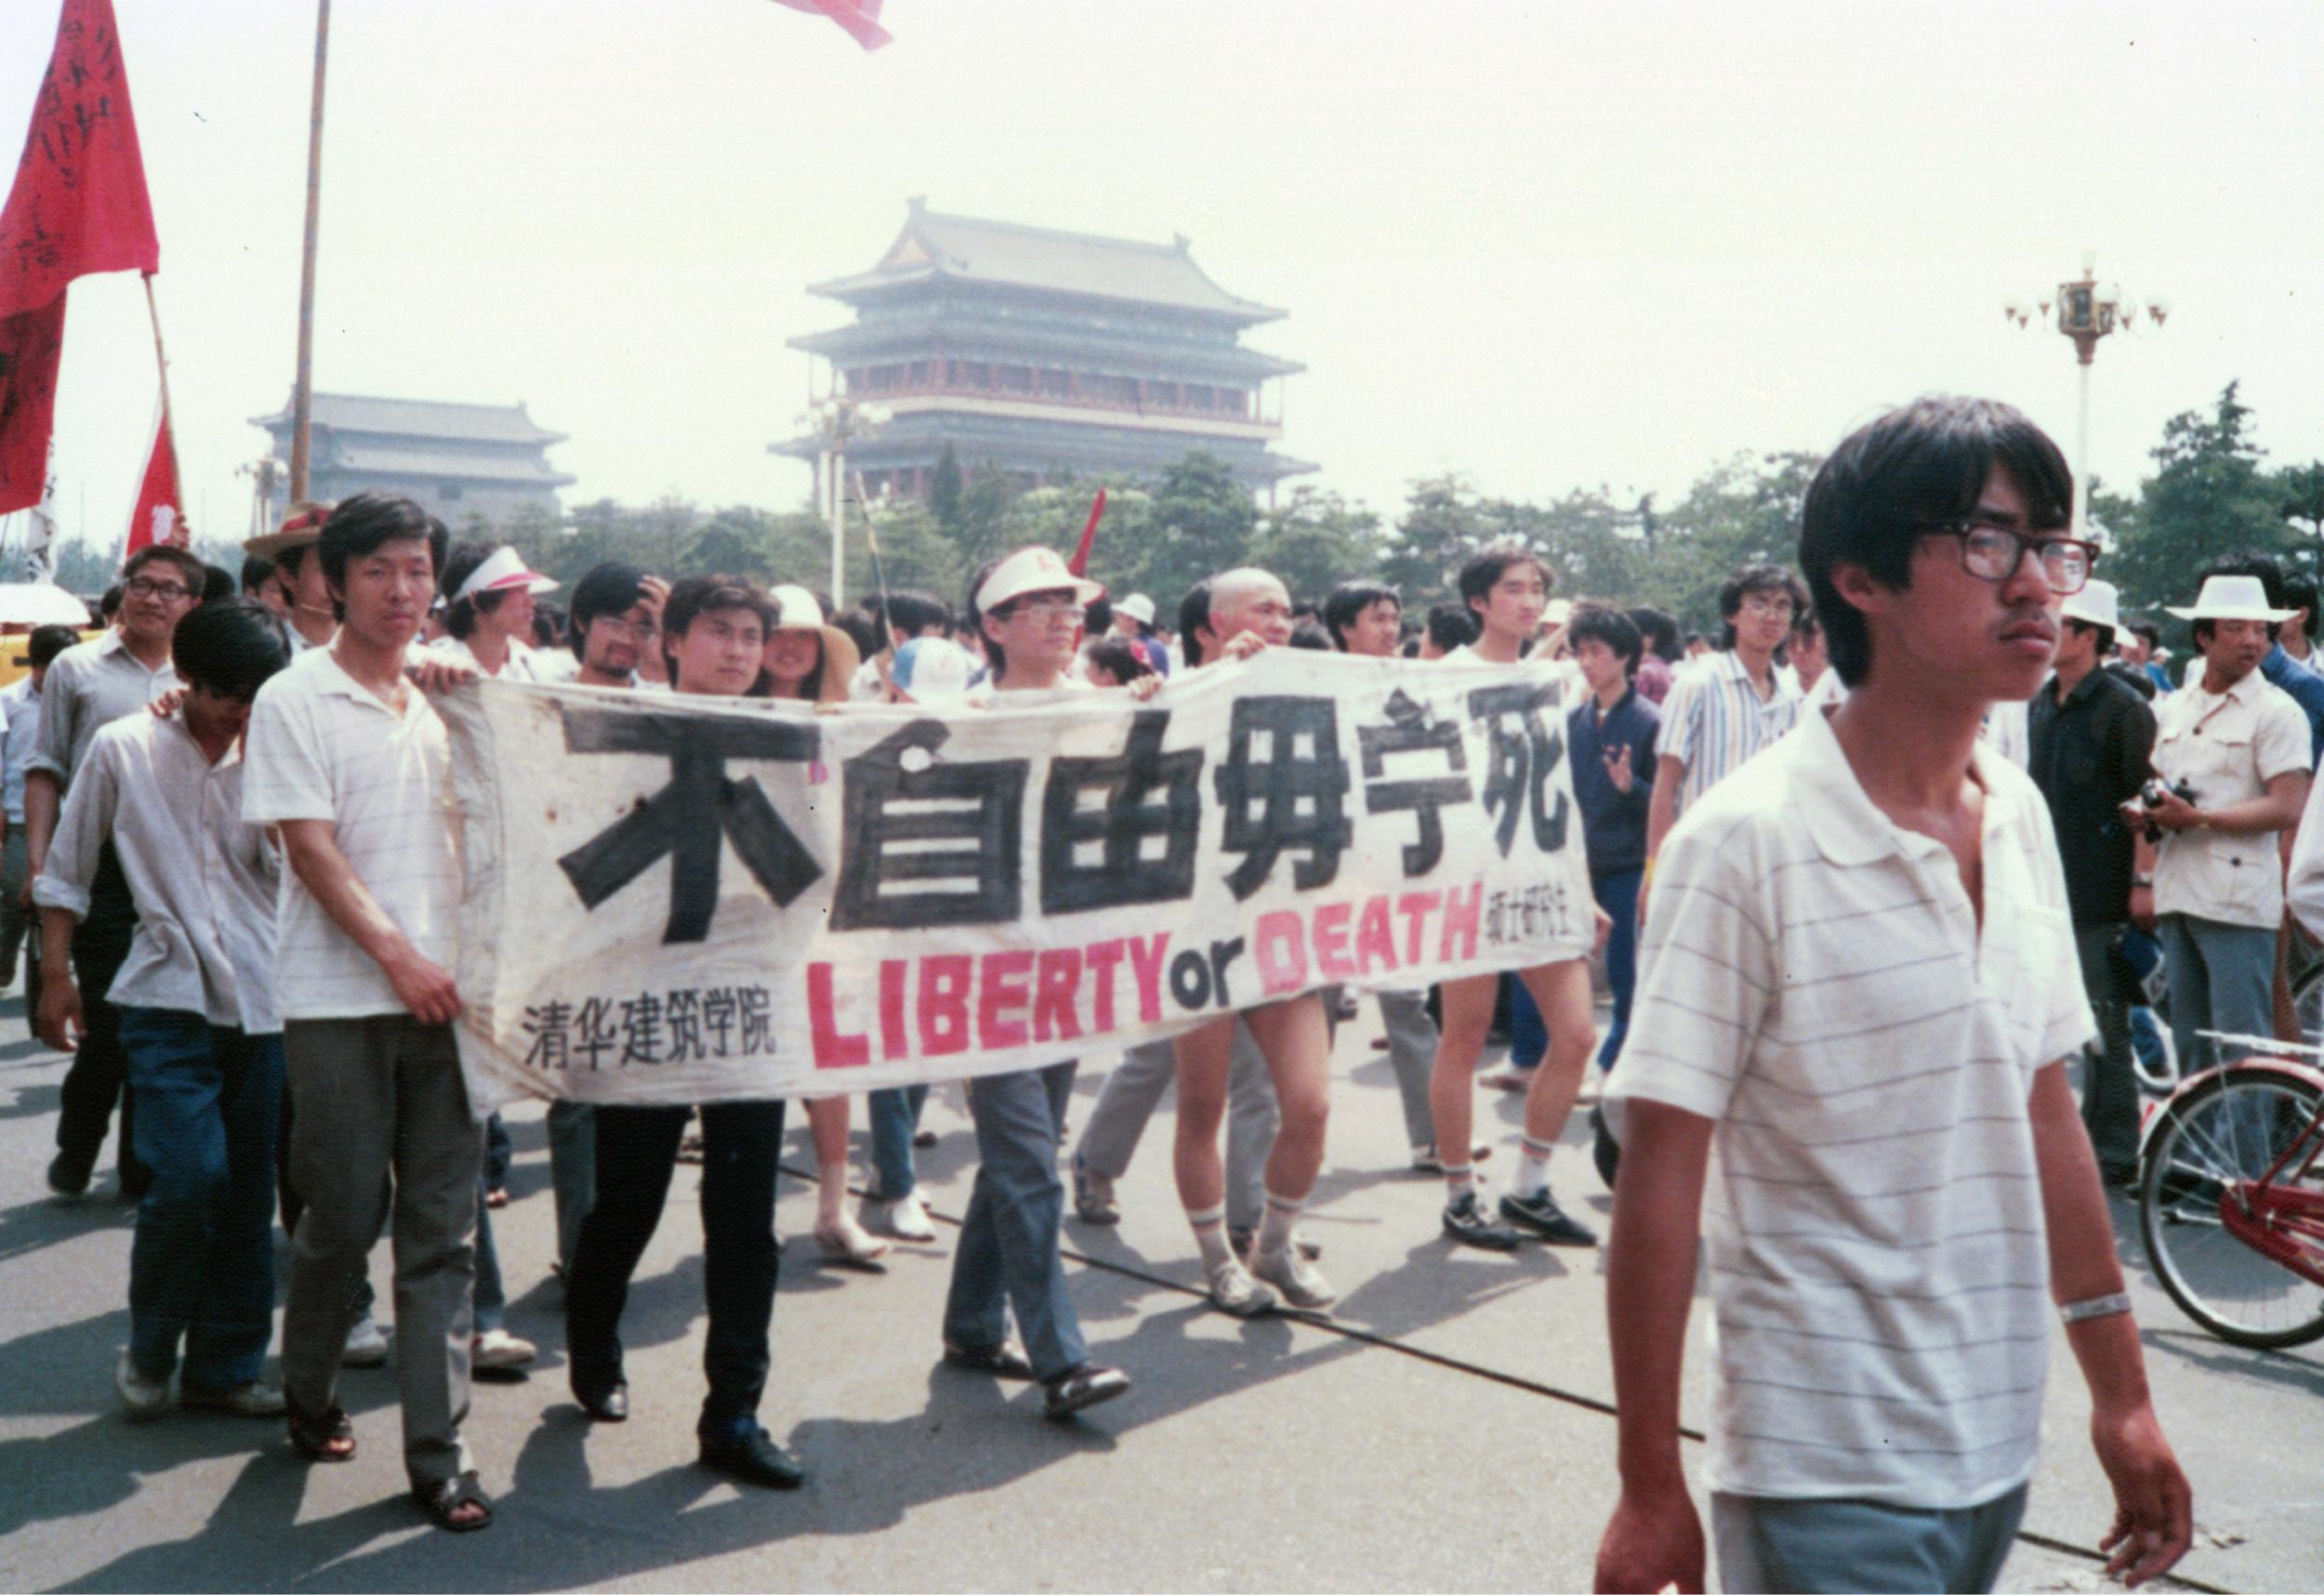 This excellent 'Storyville' documentary tells us exactly how much more there is to Tiananmen Square crisis